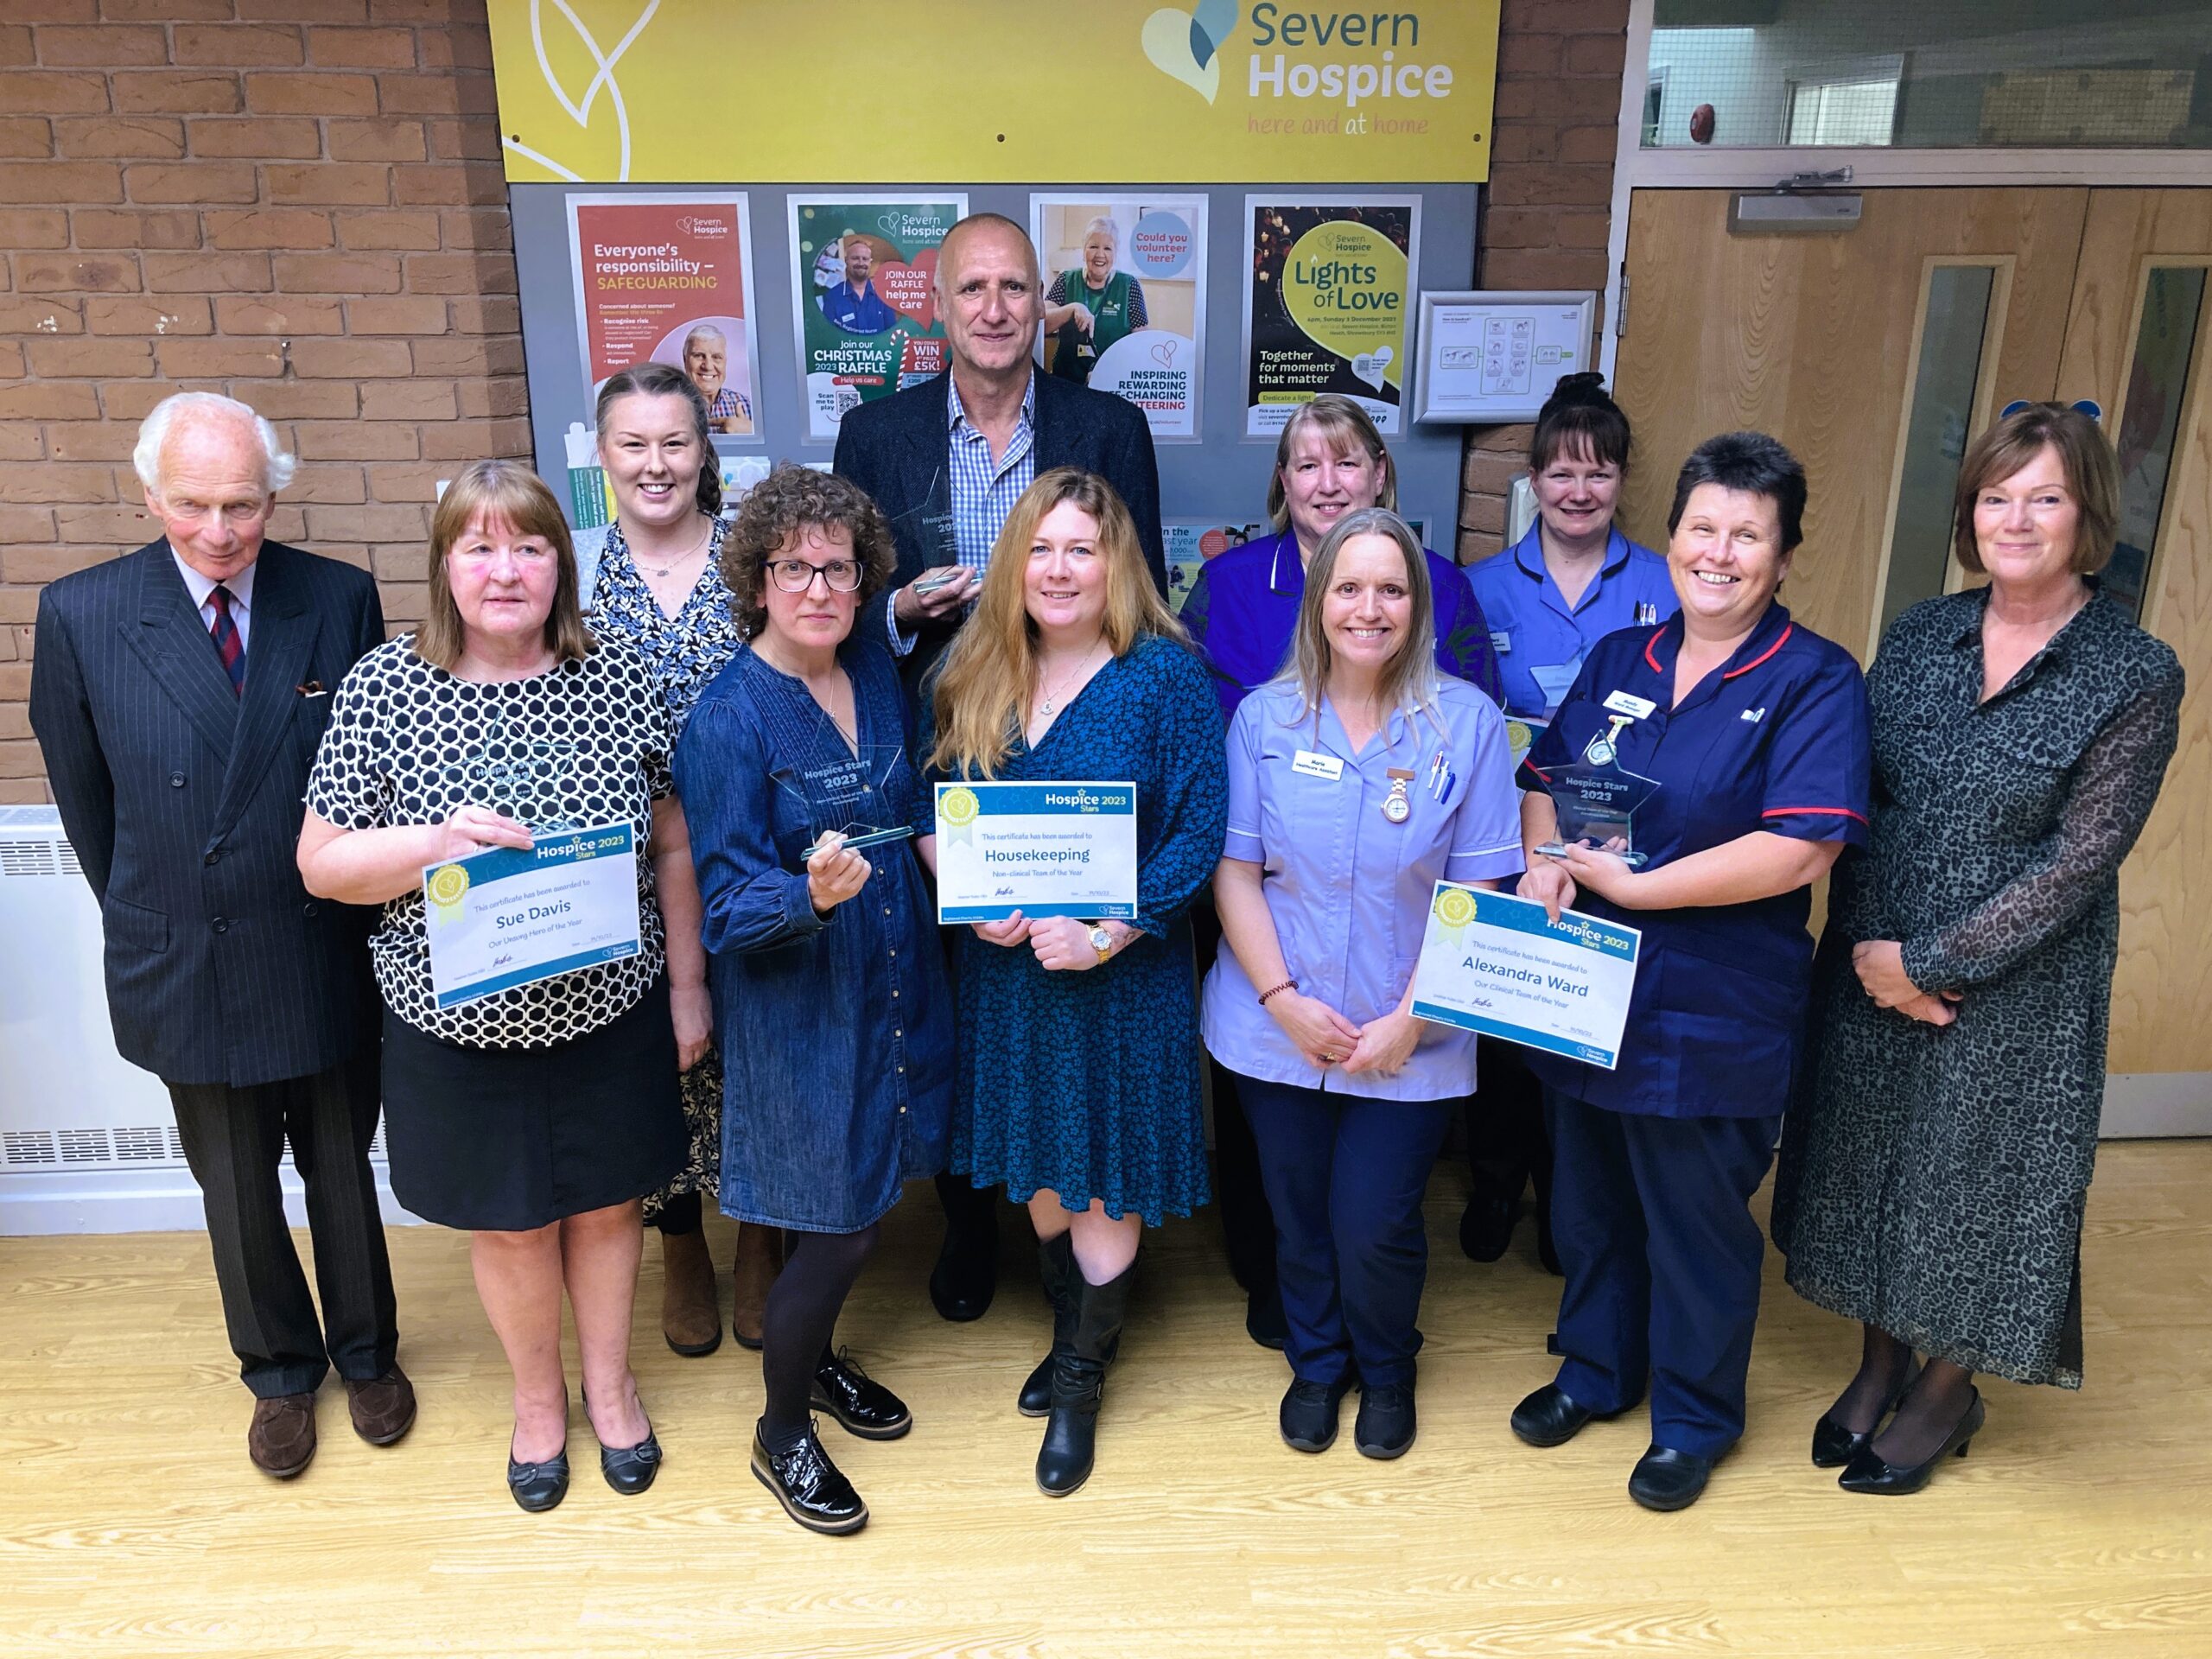 Hospice Star winners with their trophies